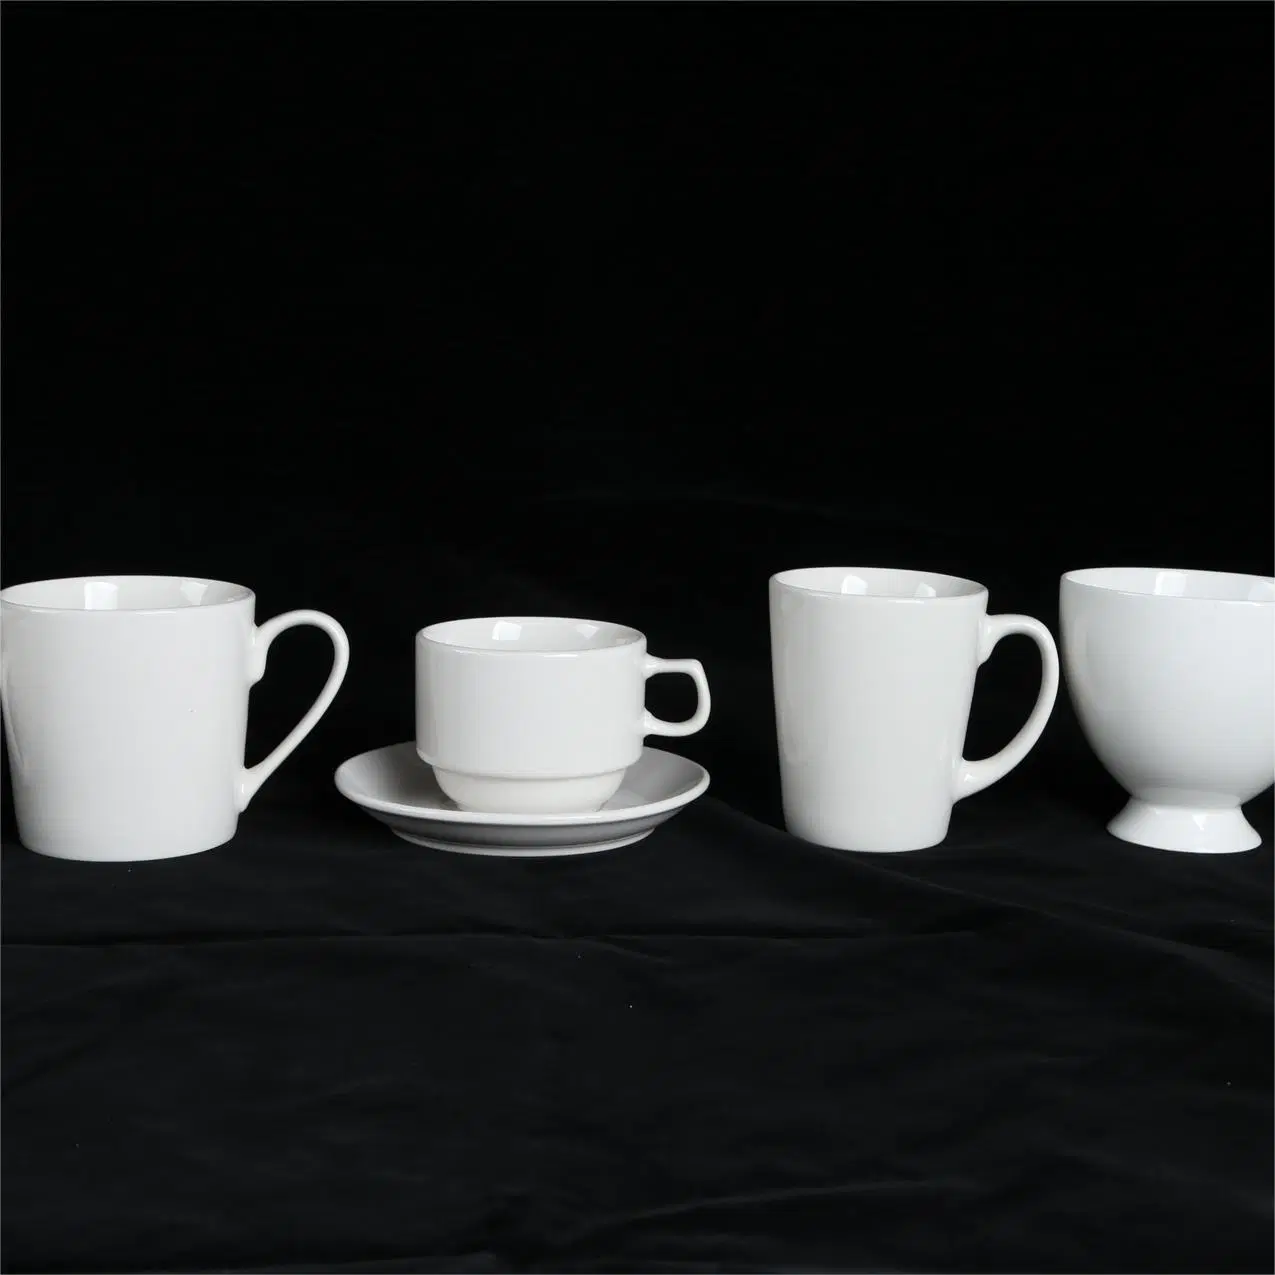 Simple Hotel Restaurant Porcelain Tea/Coffee Cup and Saucer Set